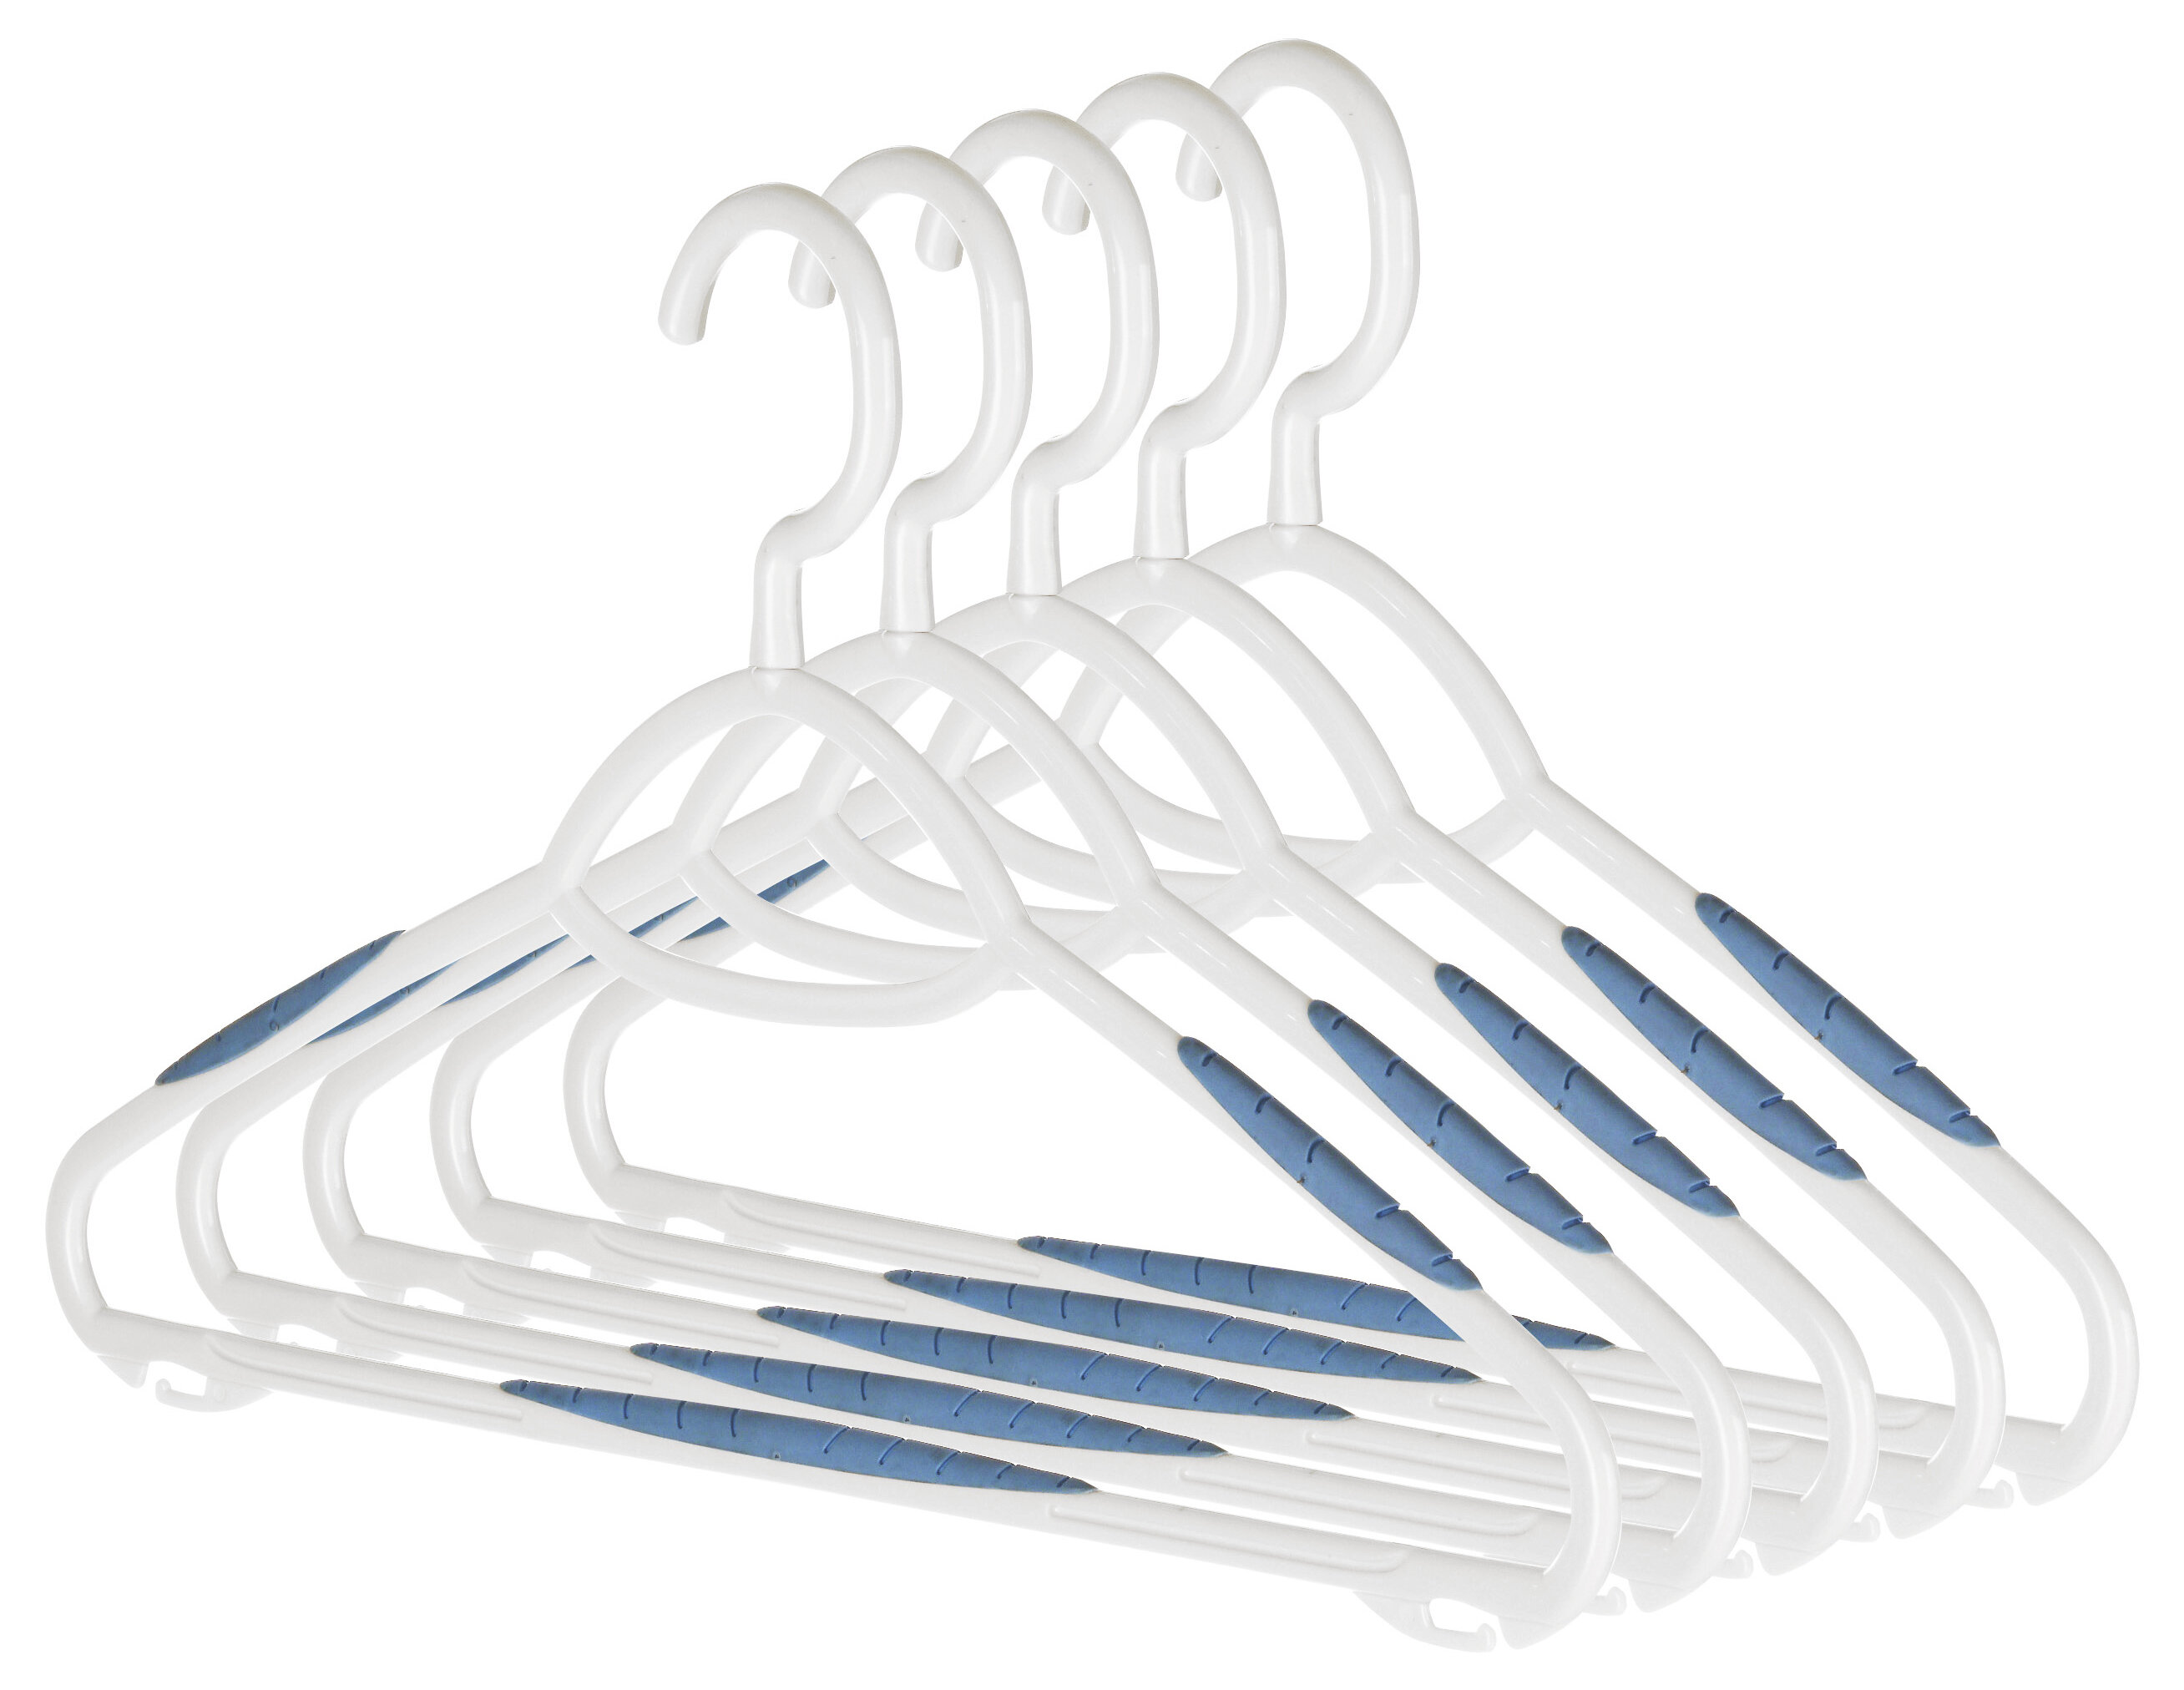 Mainstays Slim Clothes Hangers, 10 Pack, White, Durable Plastic, Space  Saving